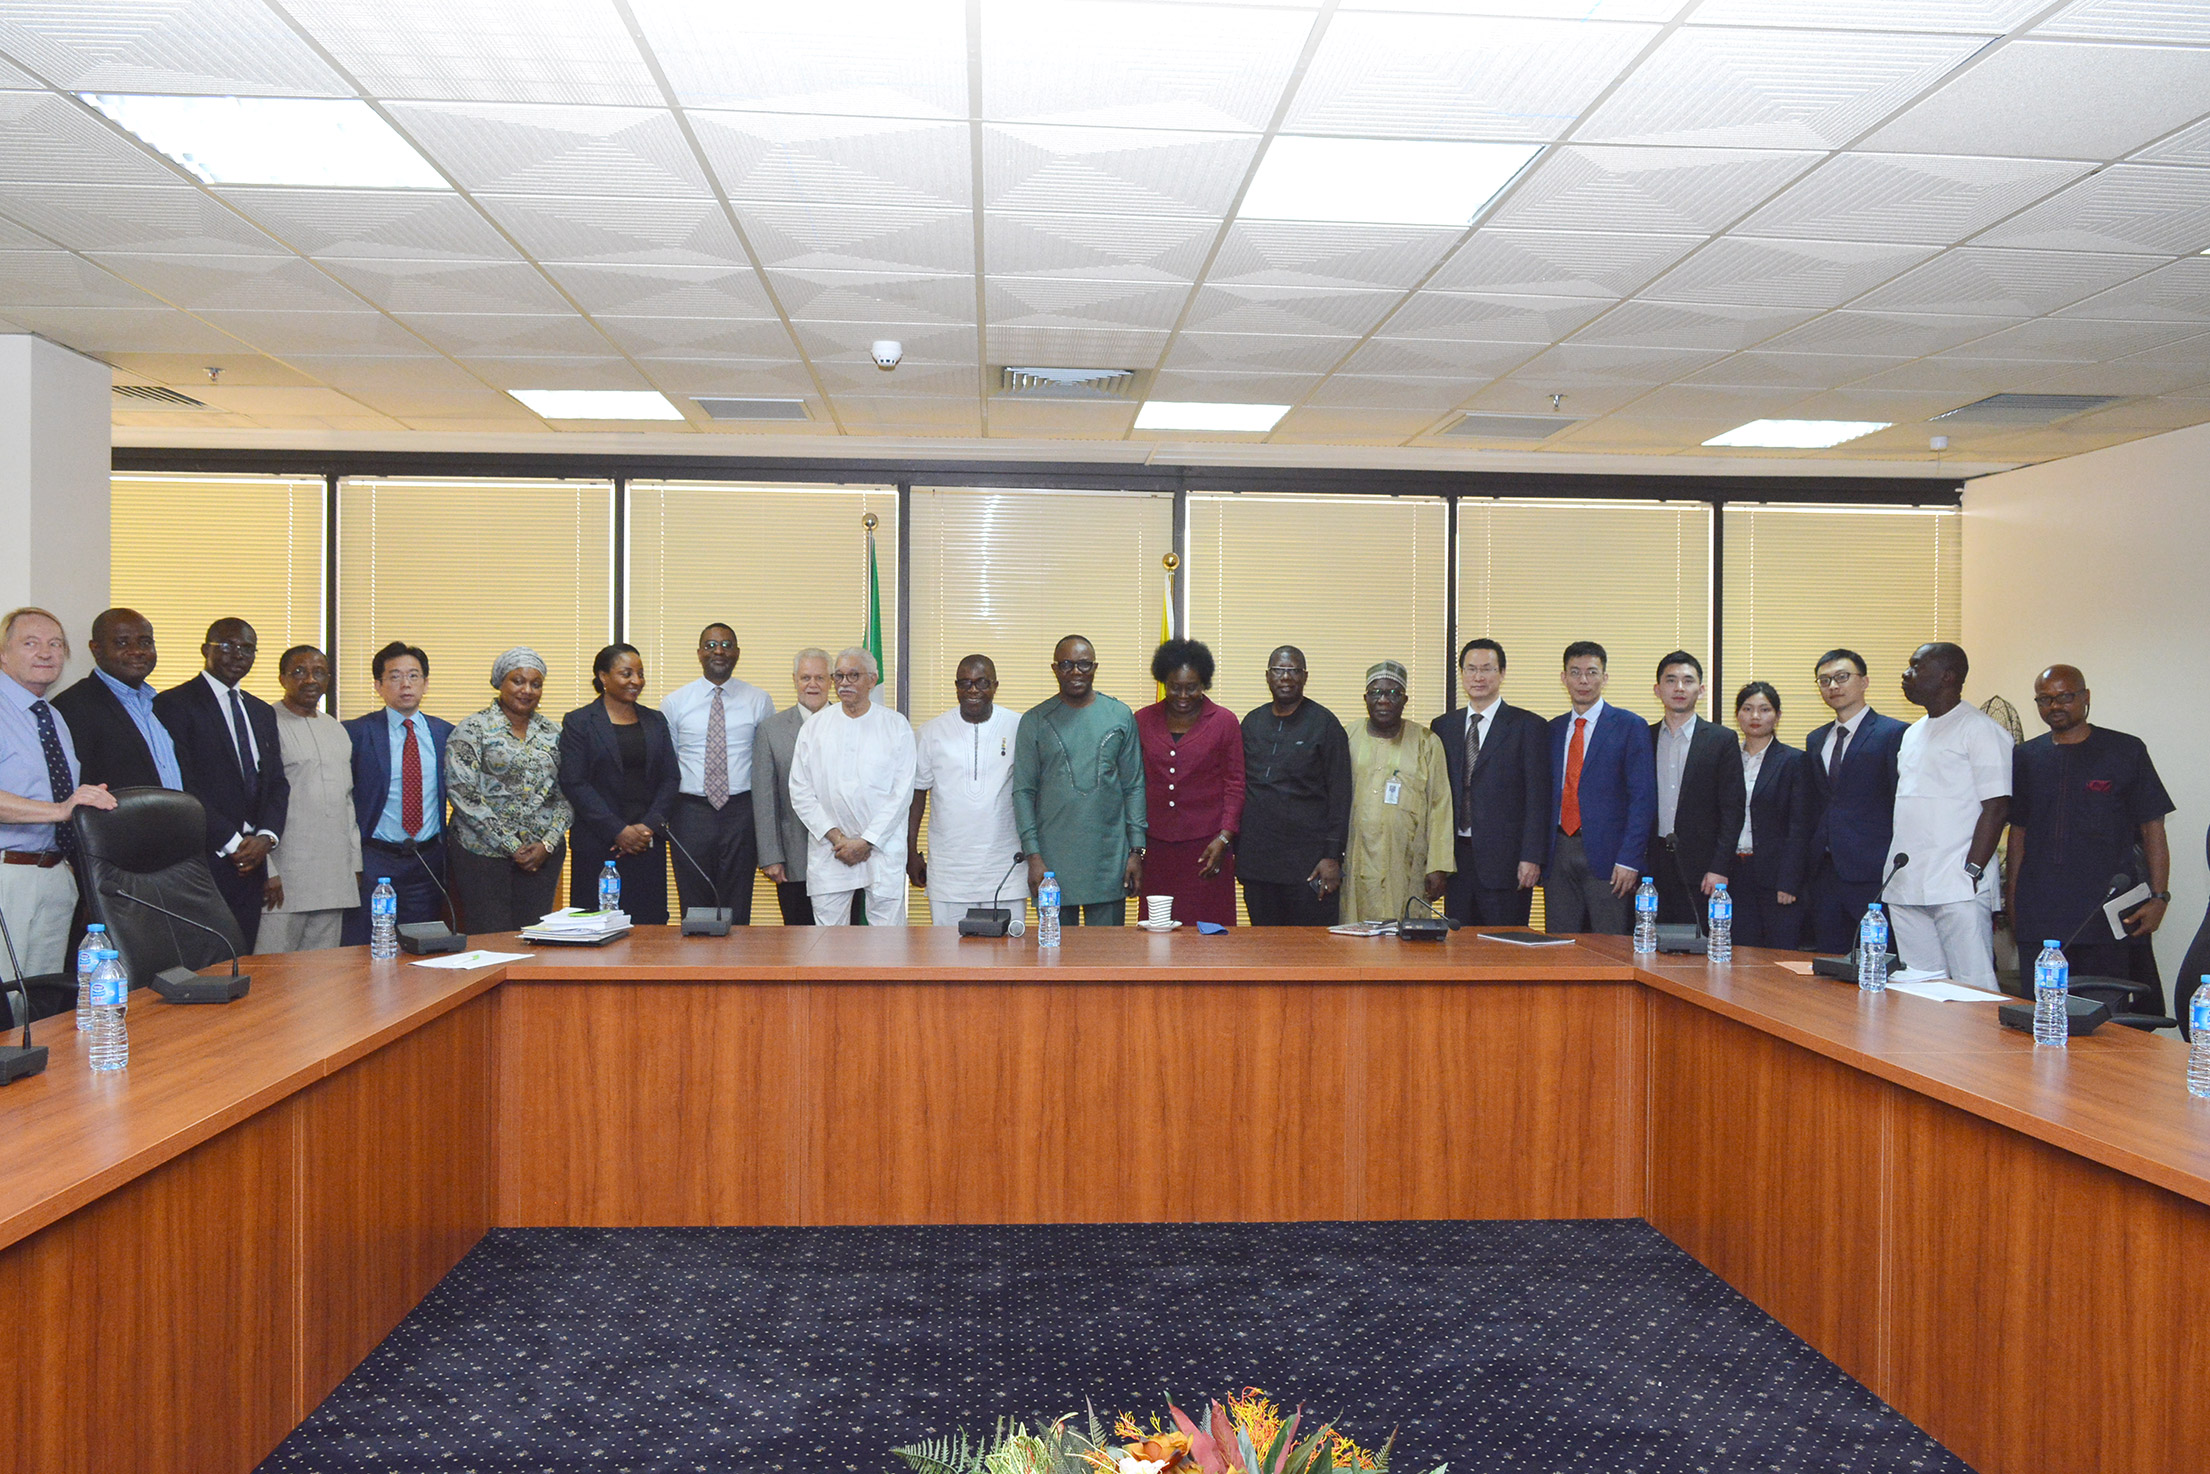 CSIC and Kaztec Explore Strategic Partnership in Shipbuilding and other Potential Opportunites in Nigeria